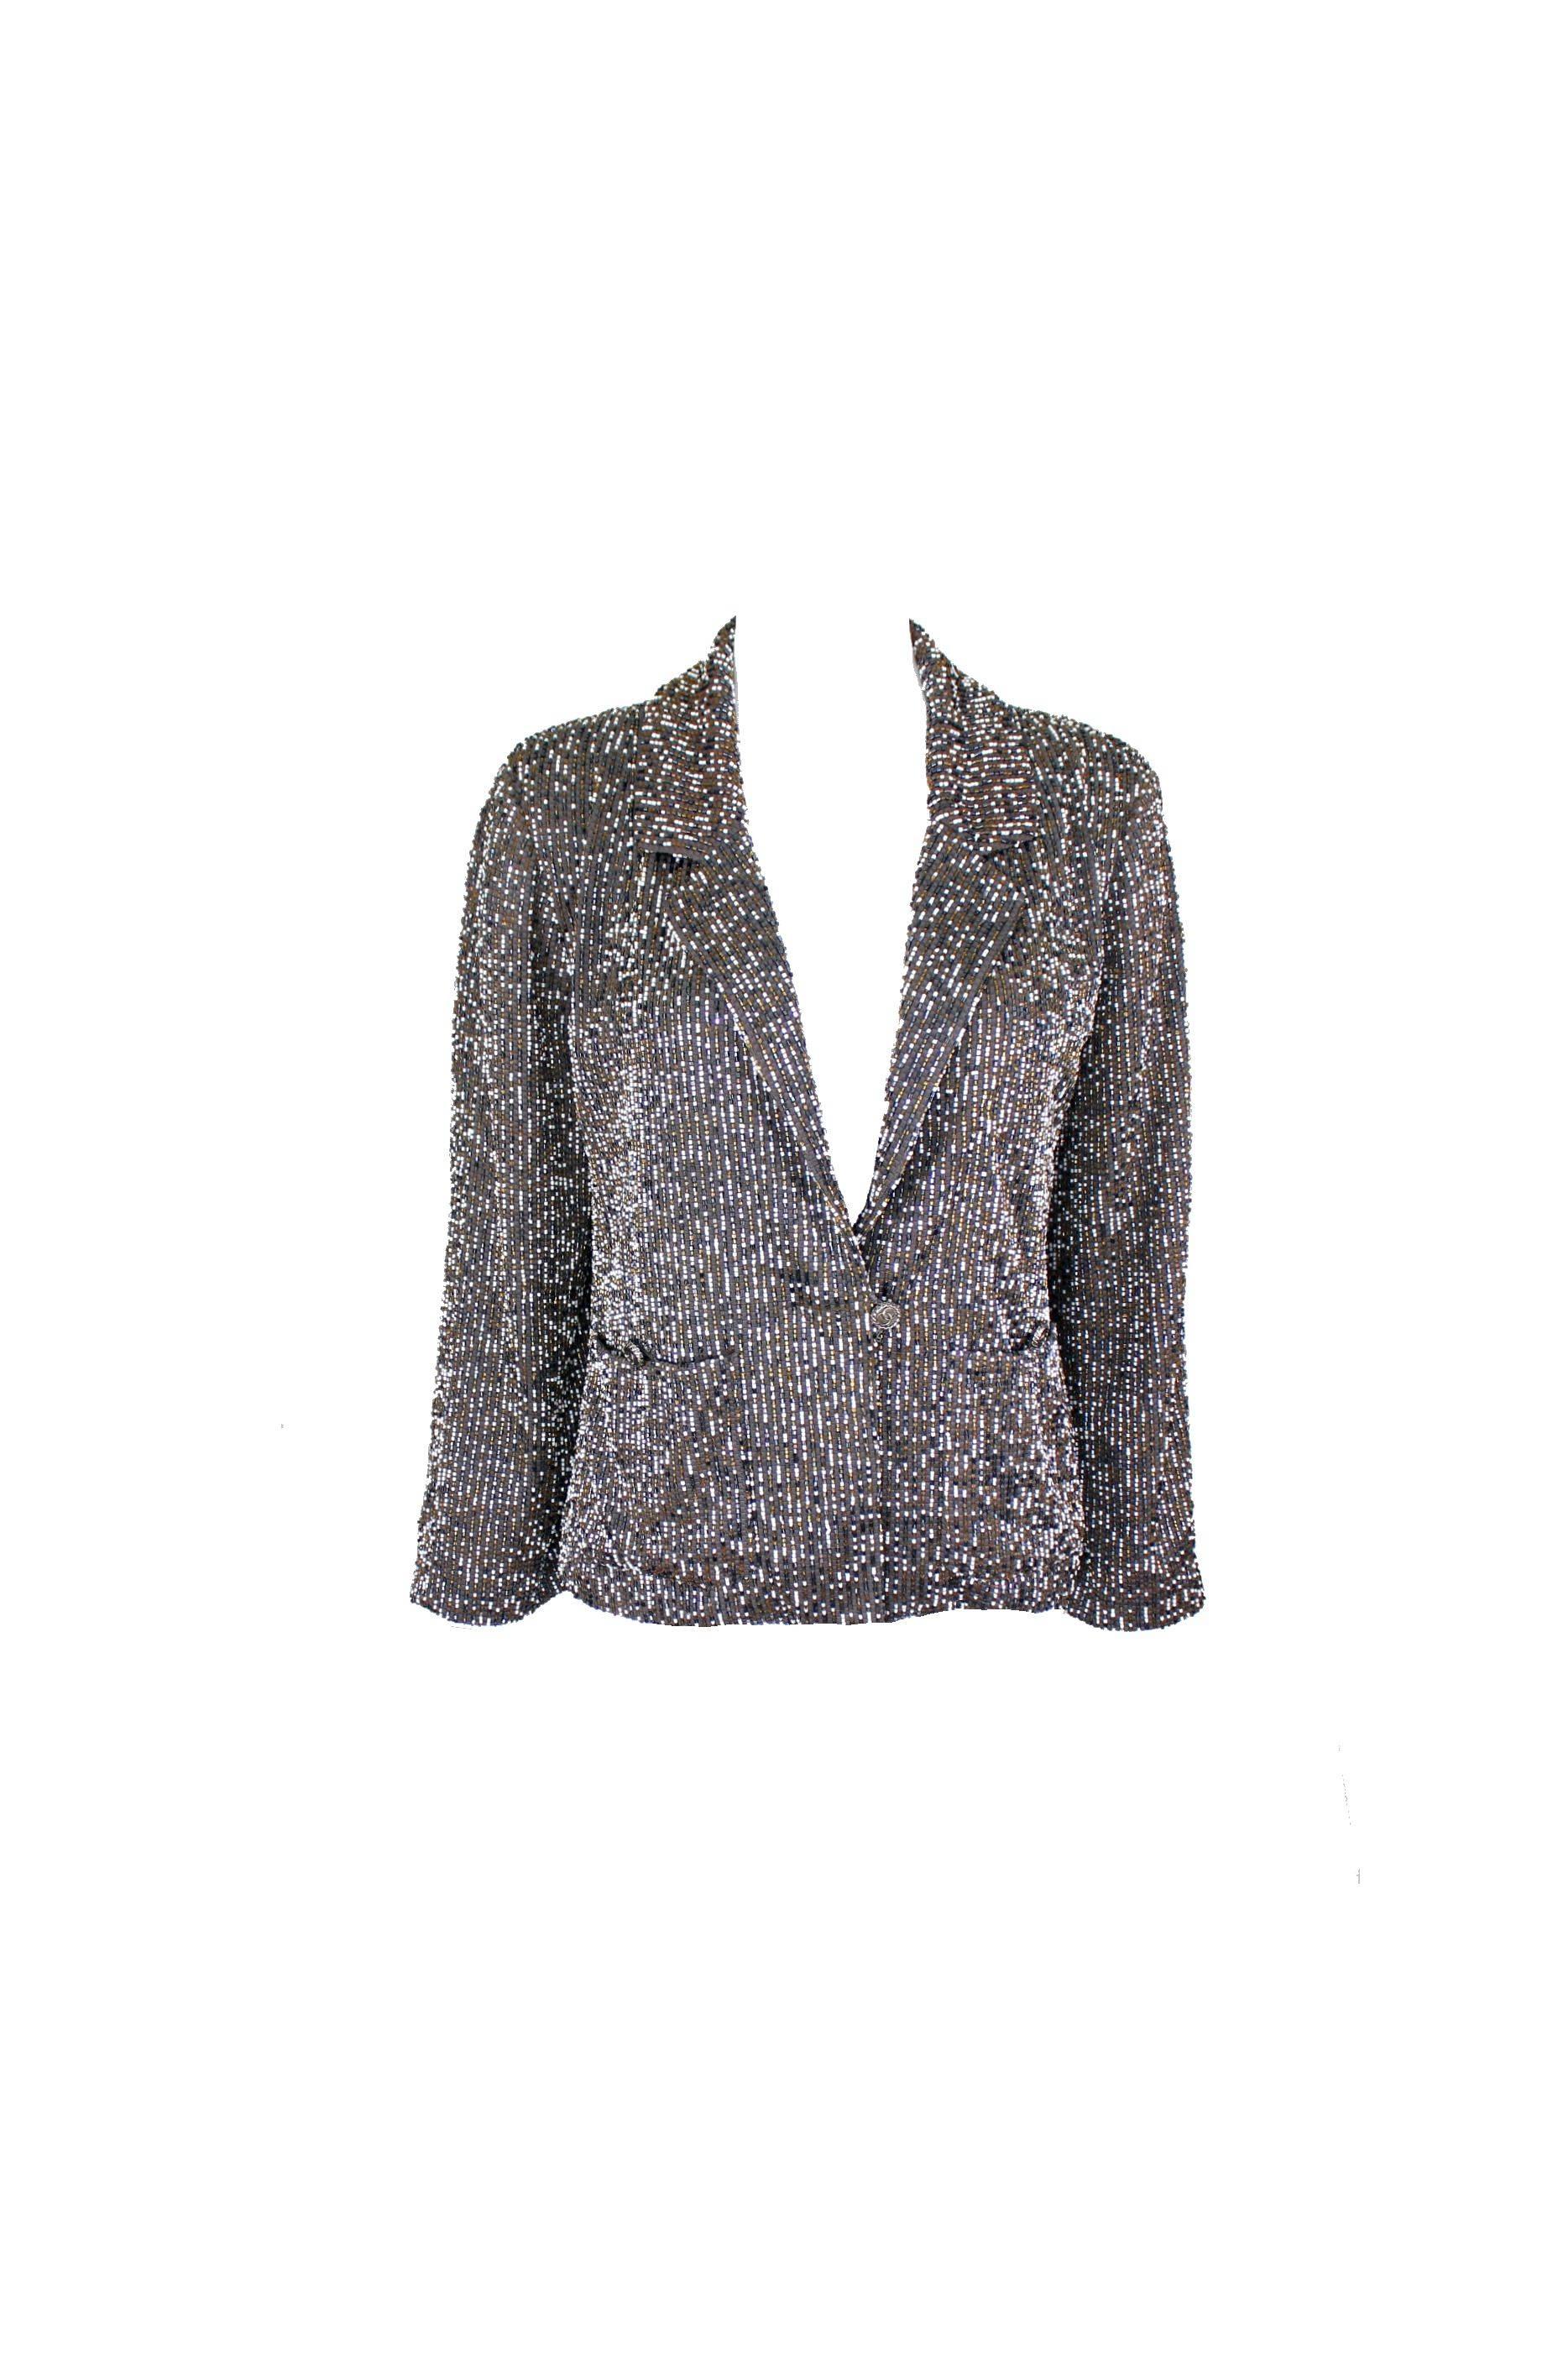 Beautiful CHANEL jacket designed by Karl Lagerfeld
A true CHANEL signature item that will last you for many years
Stunning piece
Hand-embroidered in Chanel's Atelier with many small pearl bead - just like Haute Couture
Fully lined with finest CC